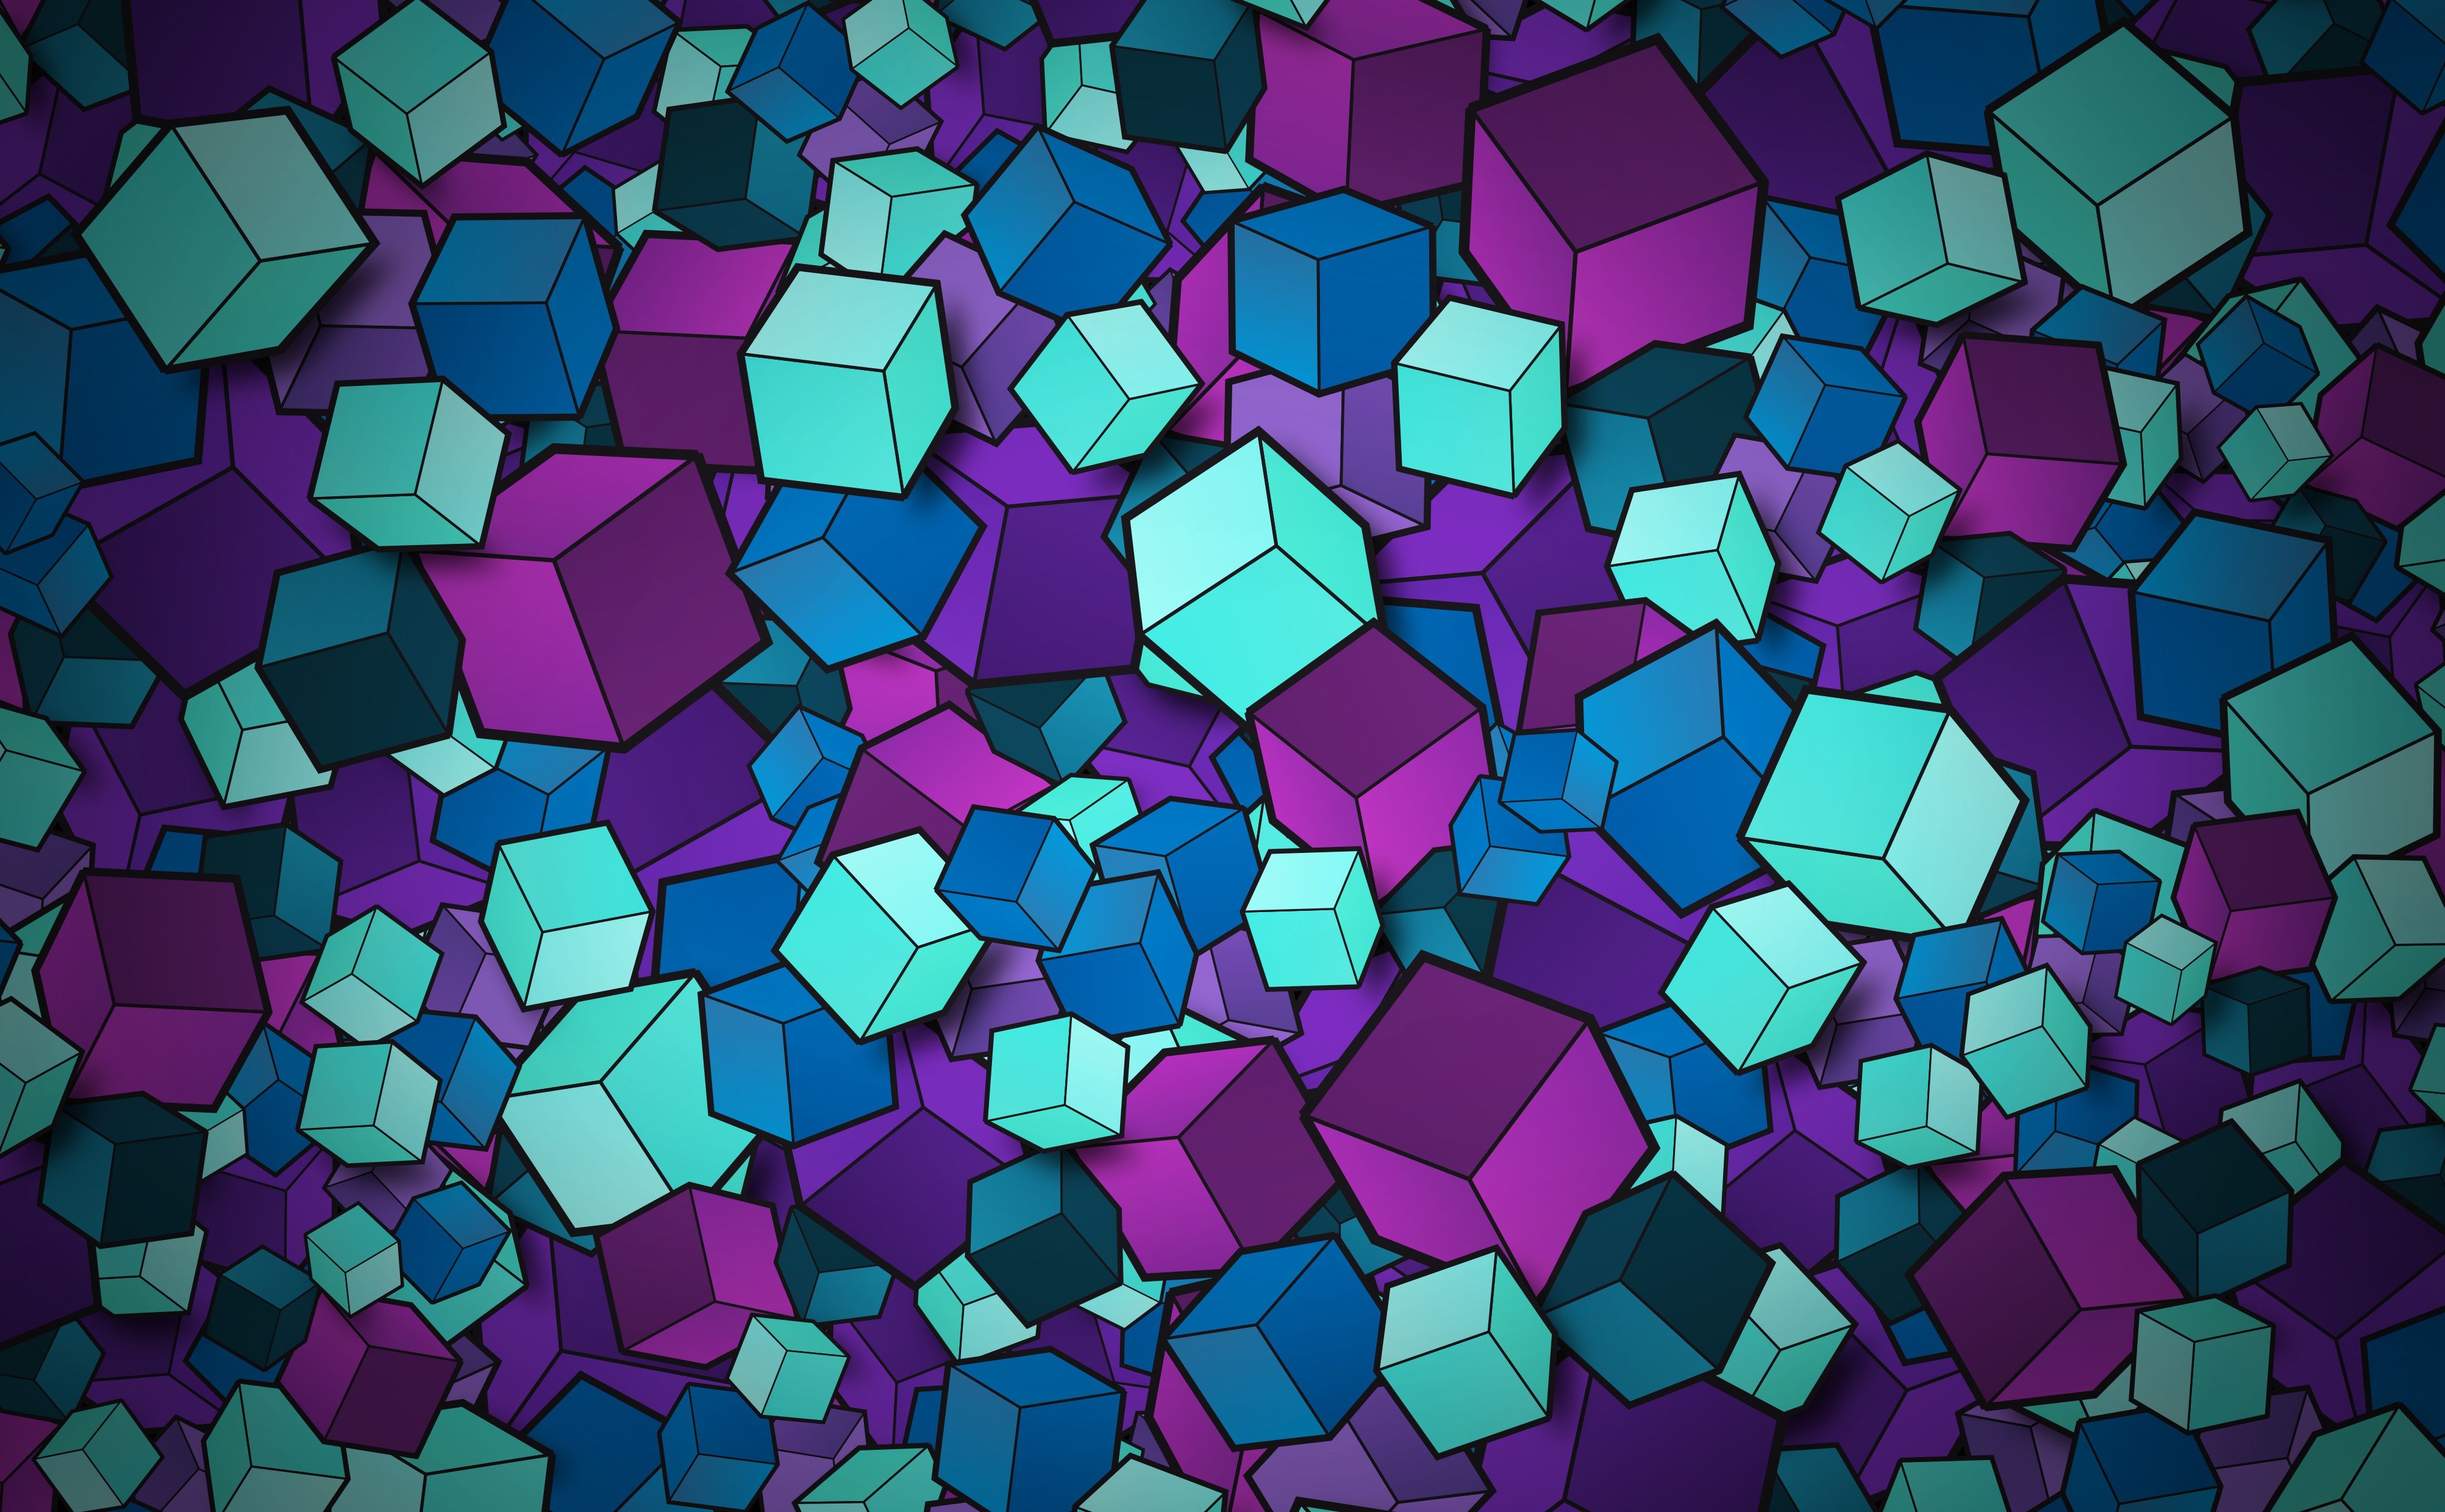 3D cubes Wallpaper 4K, Colorful, Geometric, Patterns, Abstract